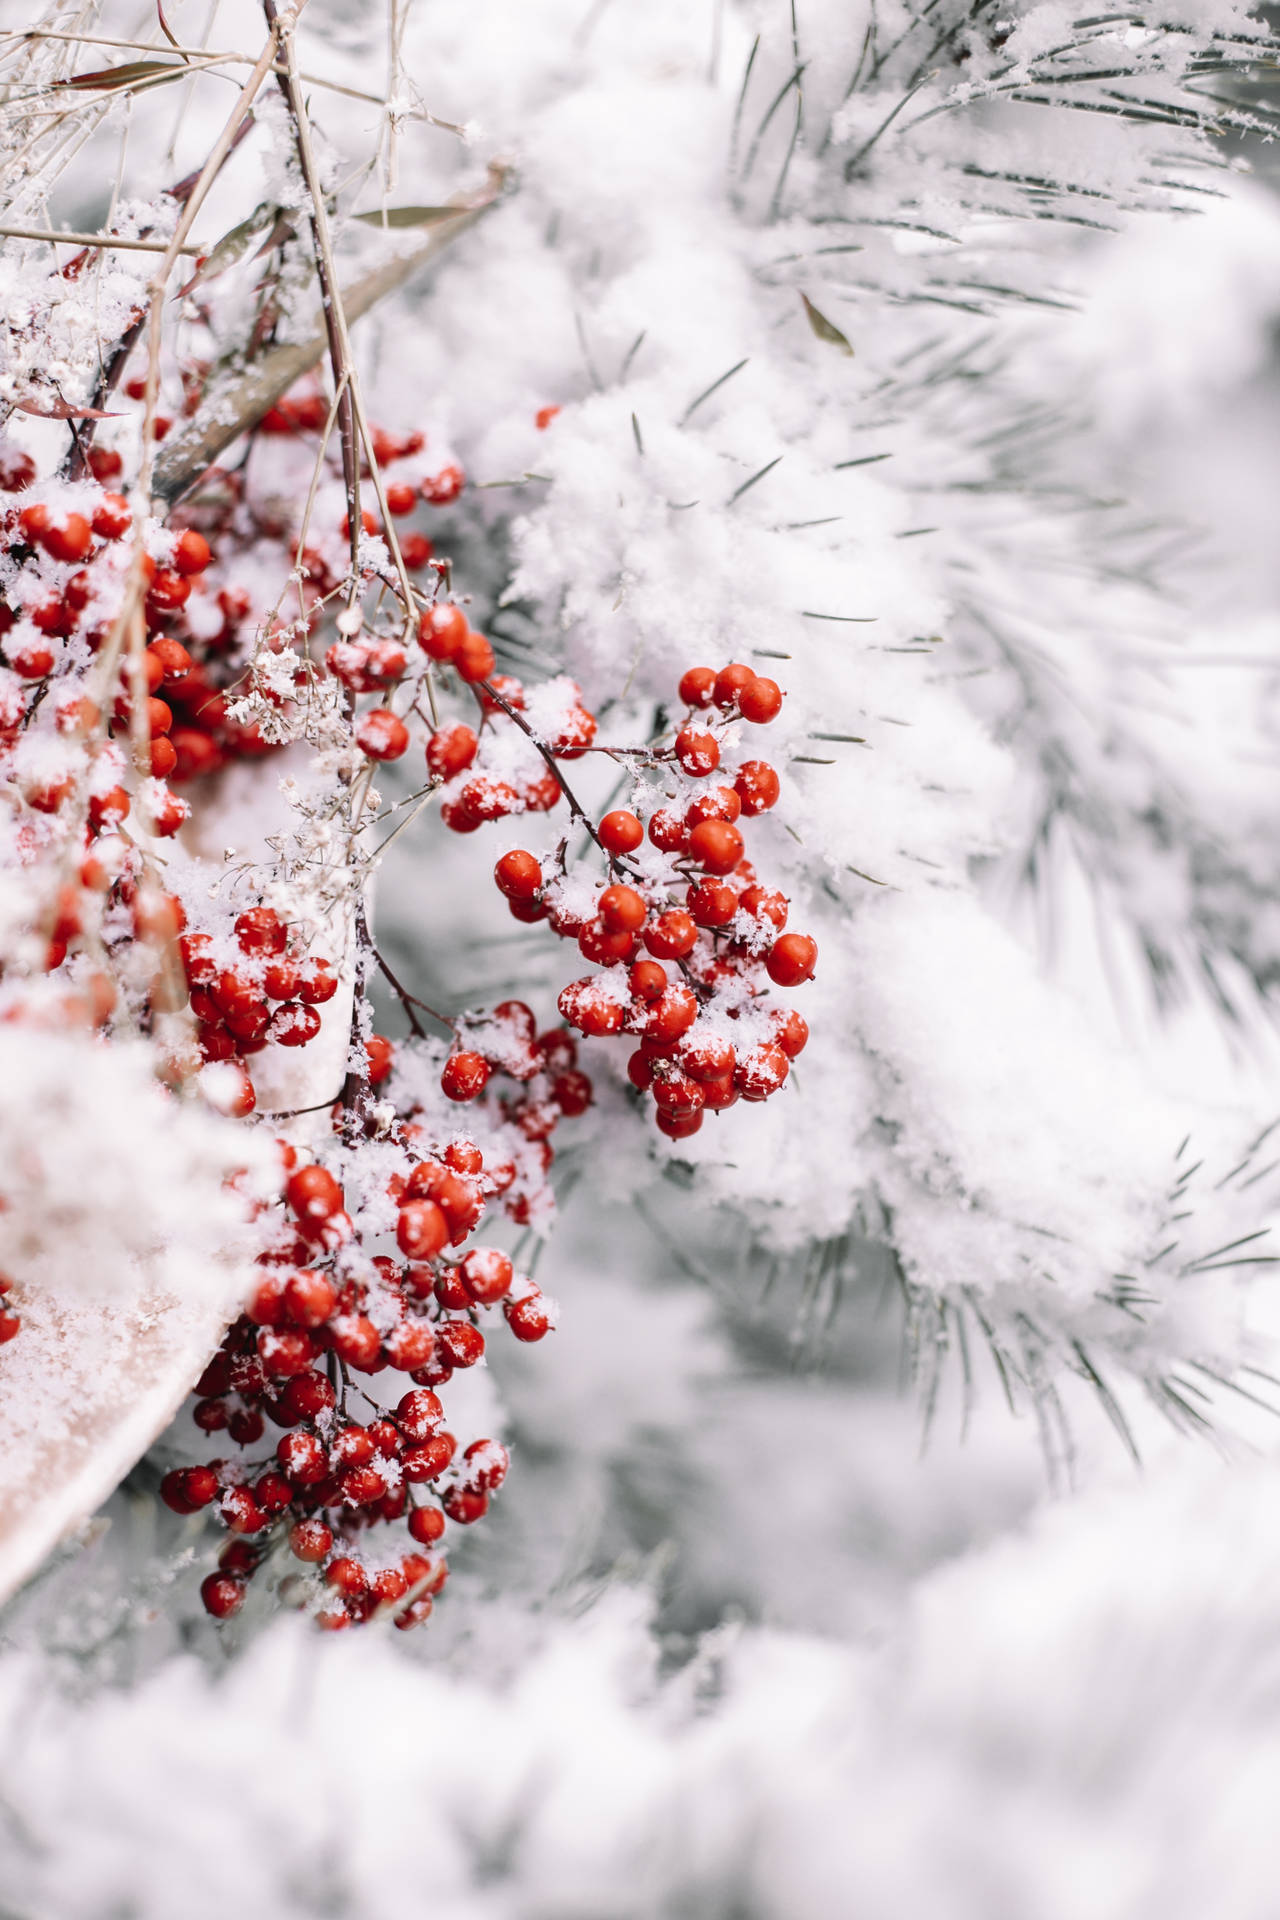 Celebrate the magic of a Snowy Christmas Wallpaper